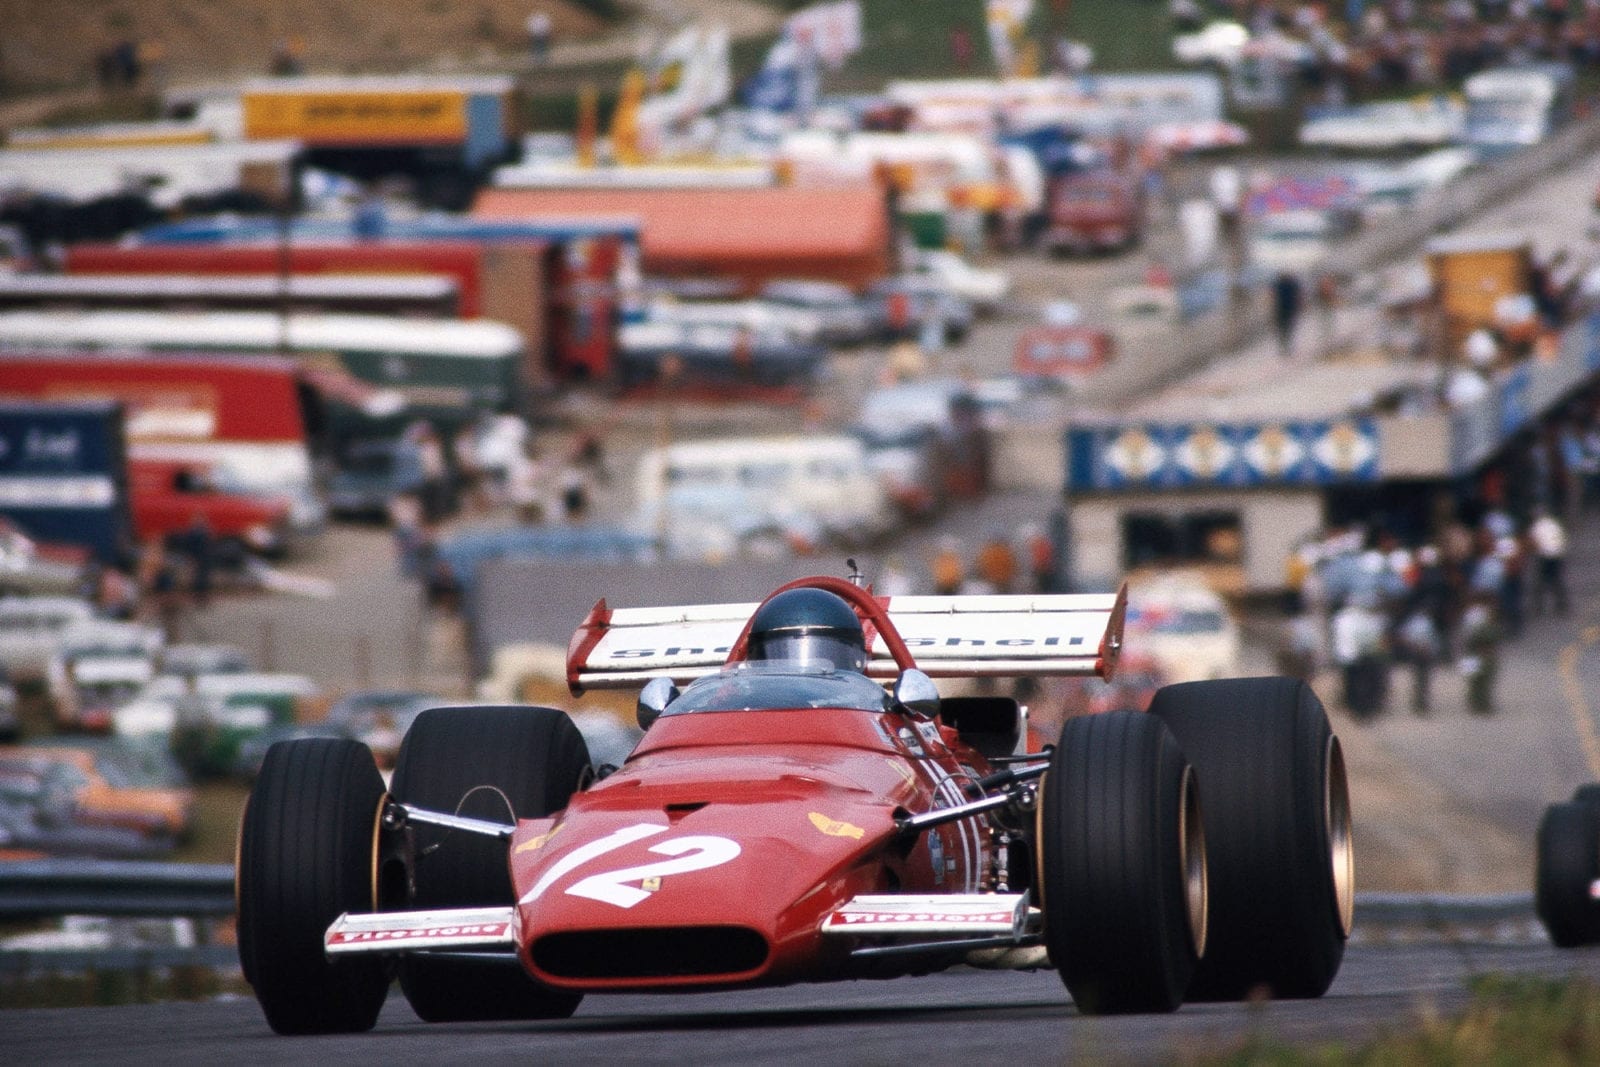 Jacky Ickx driving for Ferrari at the 1970 Austrian Grand Prix